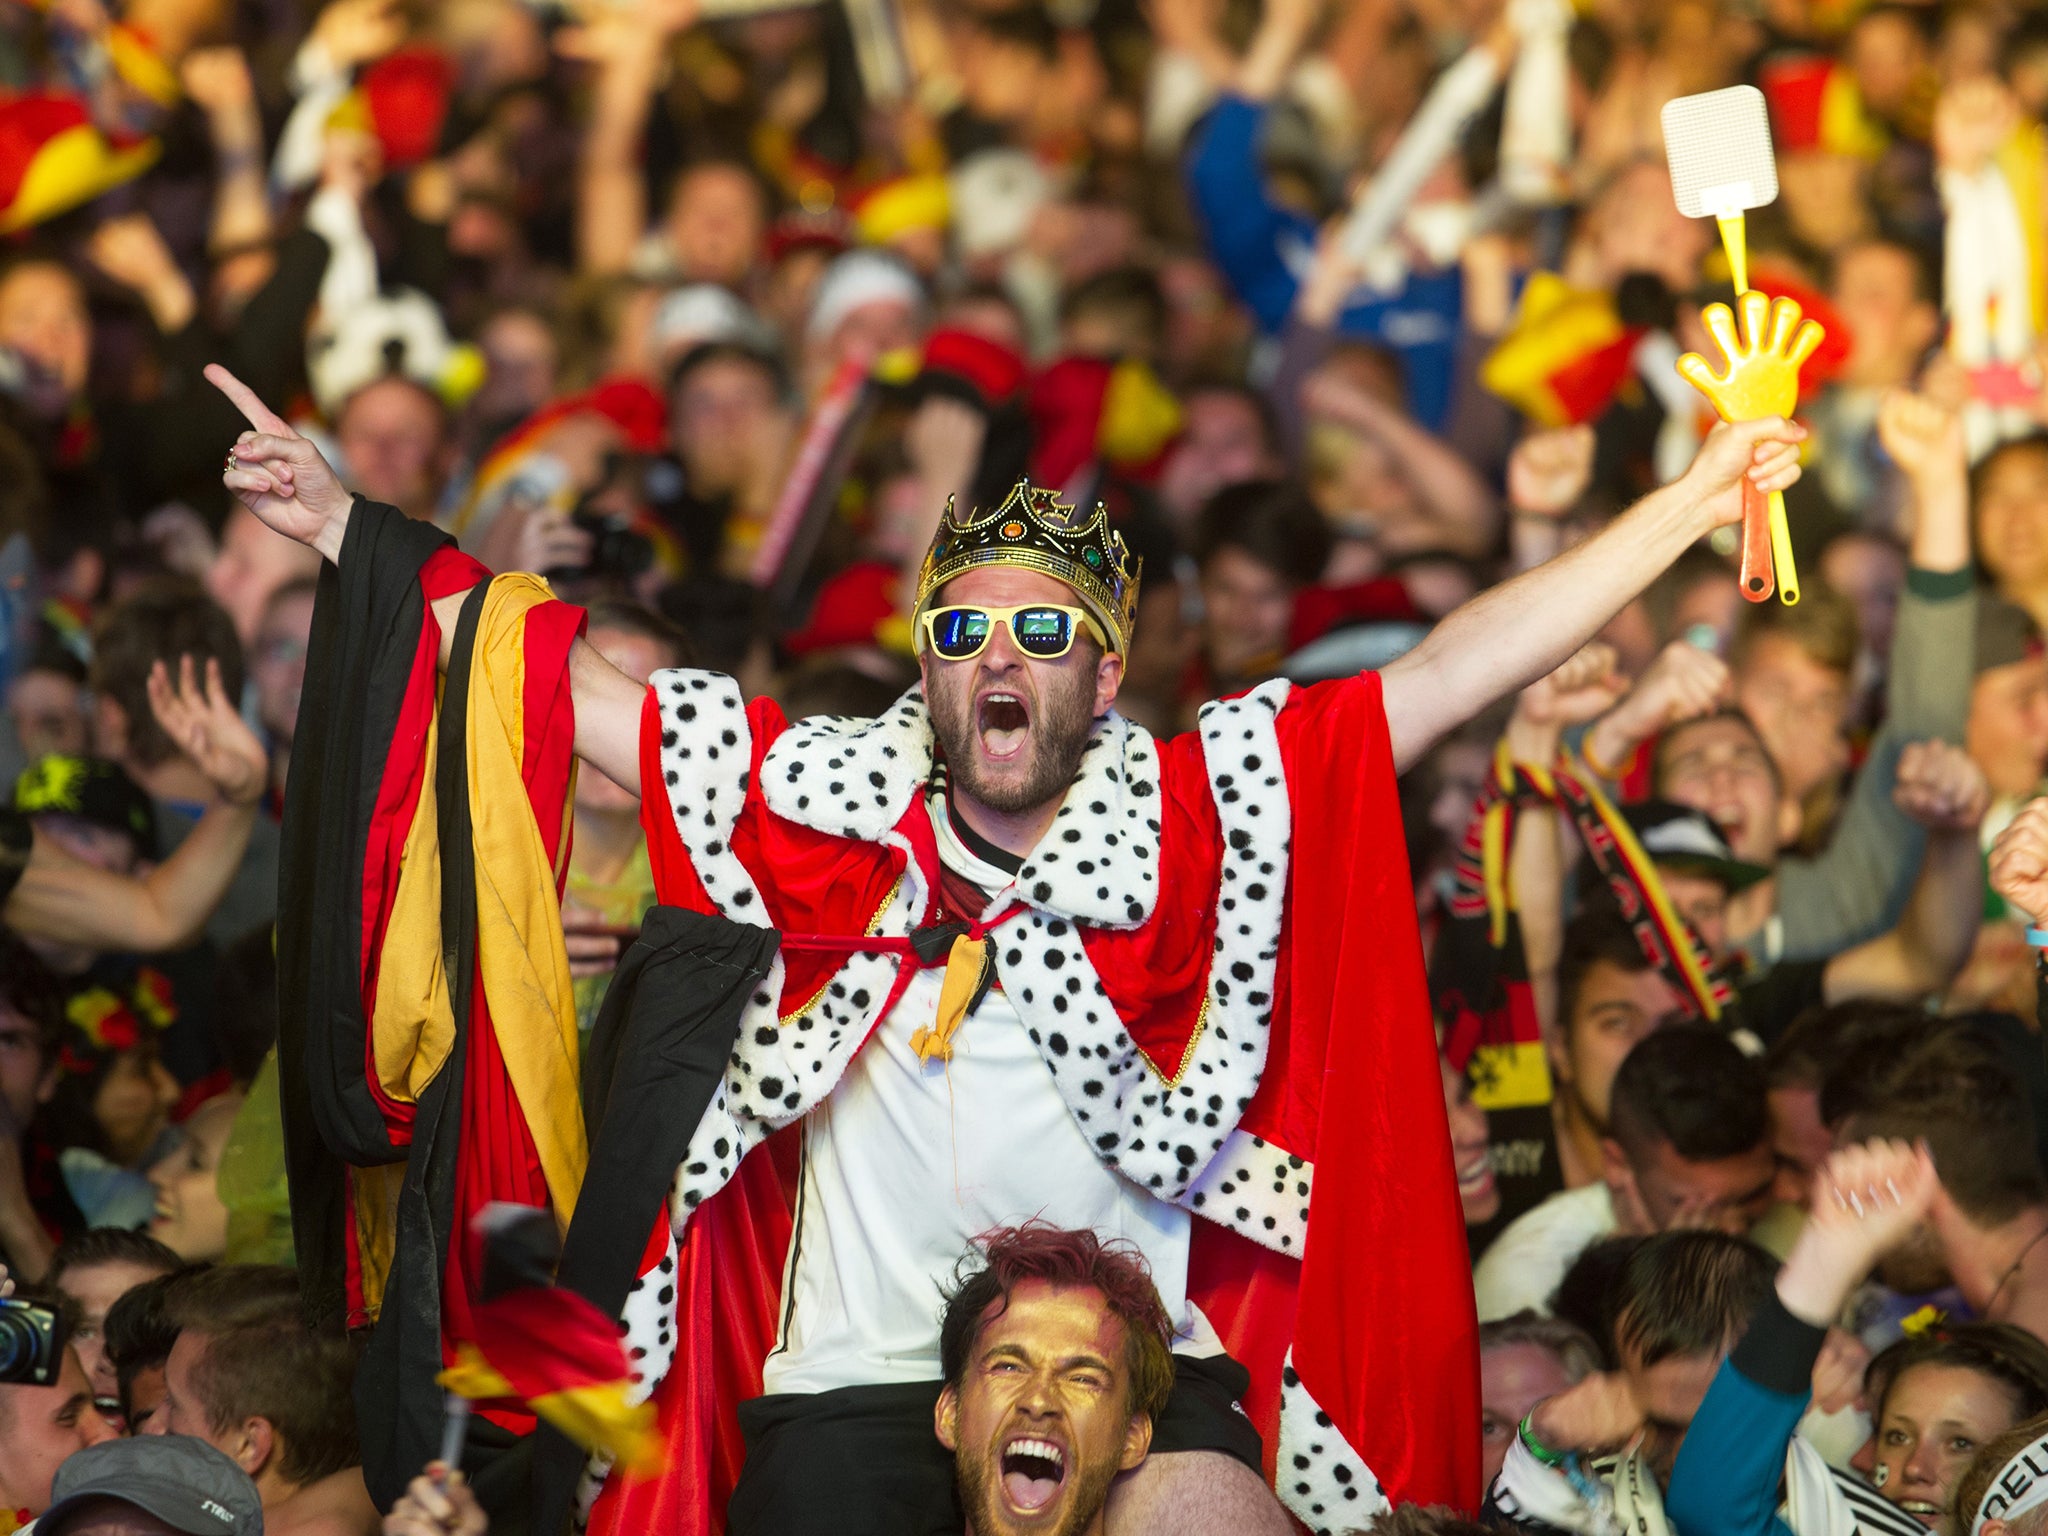 German soccer fans react after the deciding goal for Germany in the final of the Brazil World Cup 2014 between Germany and Argentina played in Rio de Janeiro, Brazil, at a public viewing area called 'Fan Mile' in Berlin